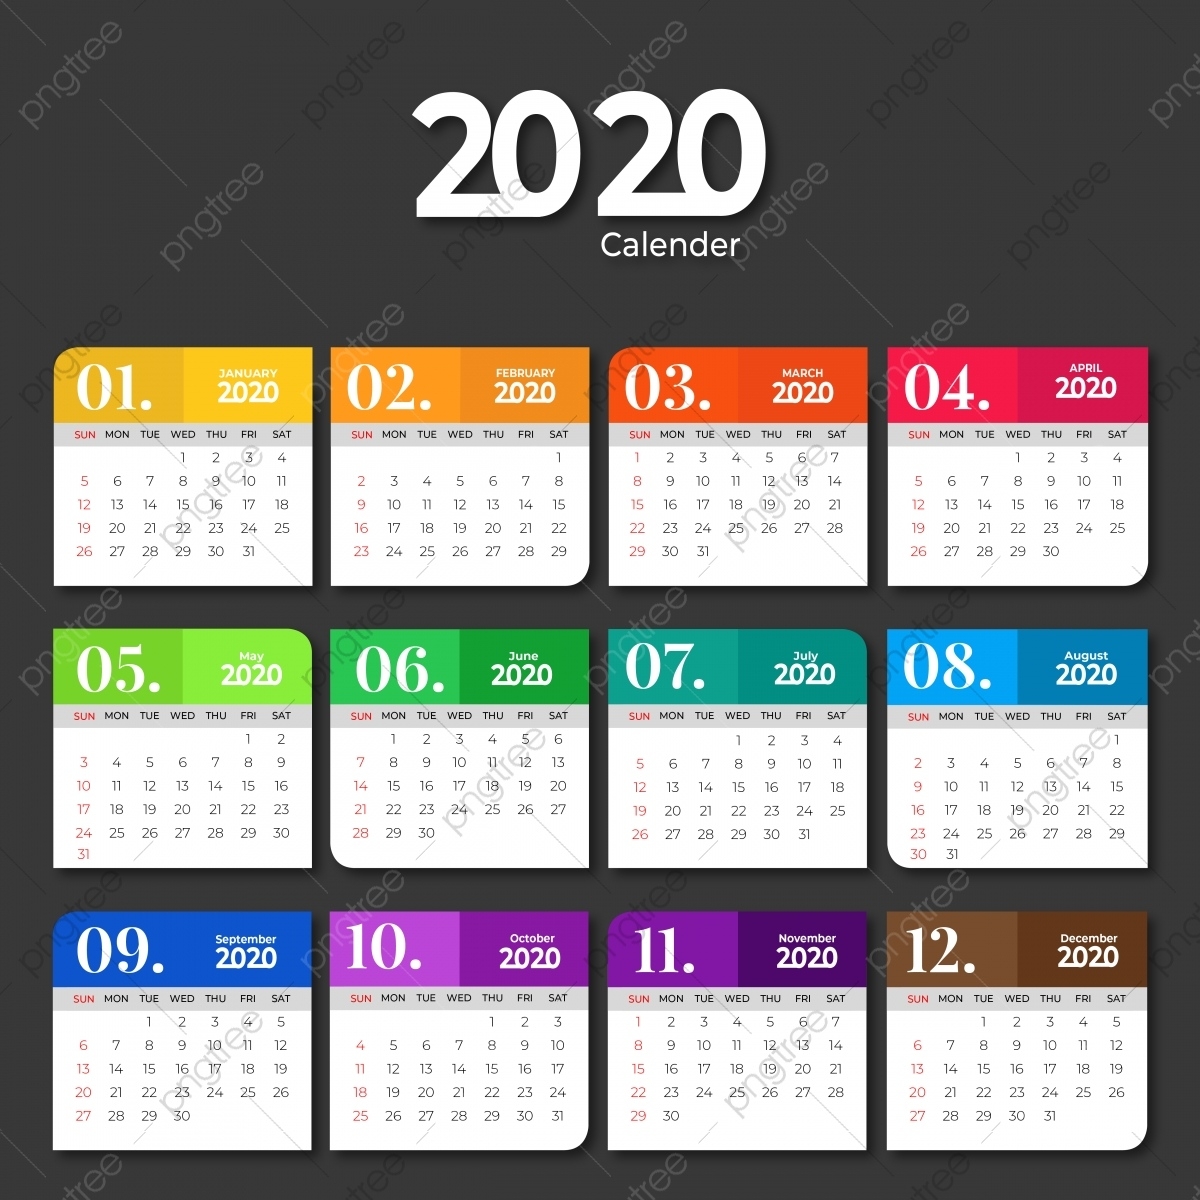 2020 Calendar Template Design With Solid Colors, 2020 Impressive Calendar Template 2020 Illustrator Template